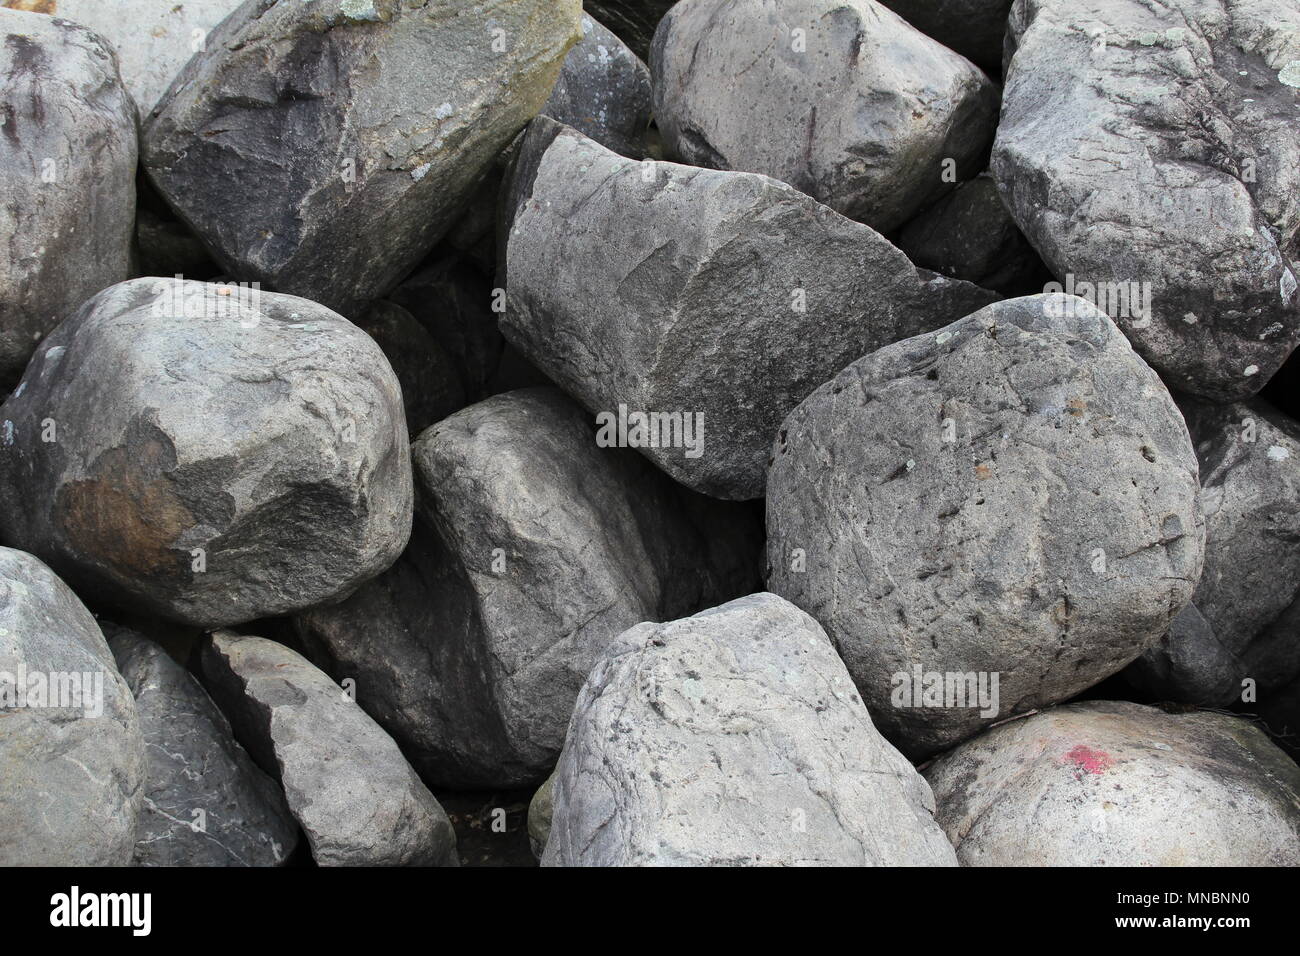 A calm & relaxing picture of rocks that you could stare at for hours. Stock Photo